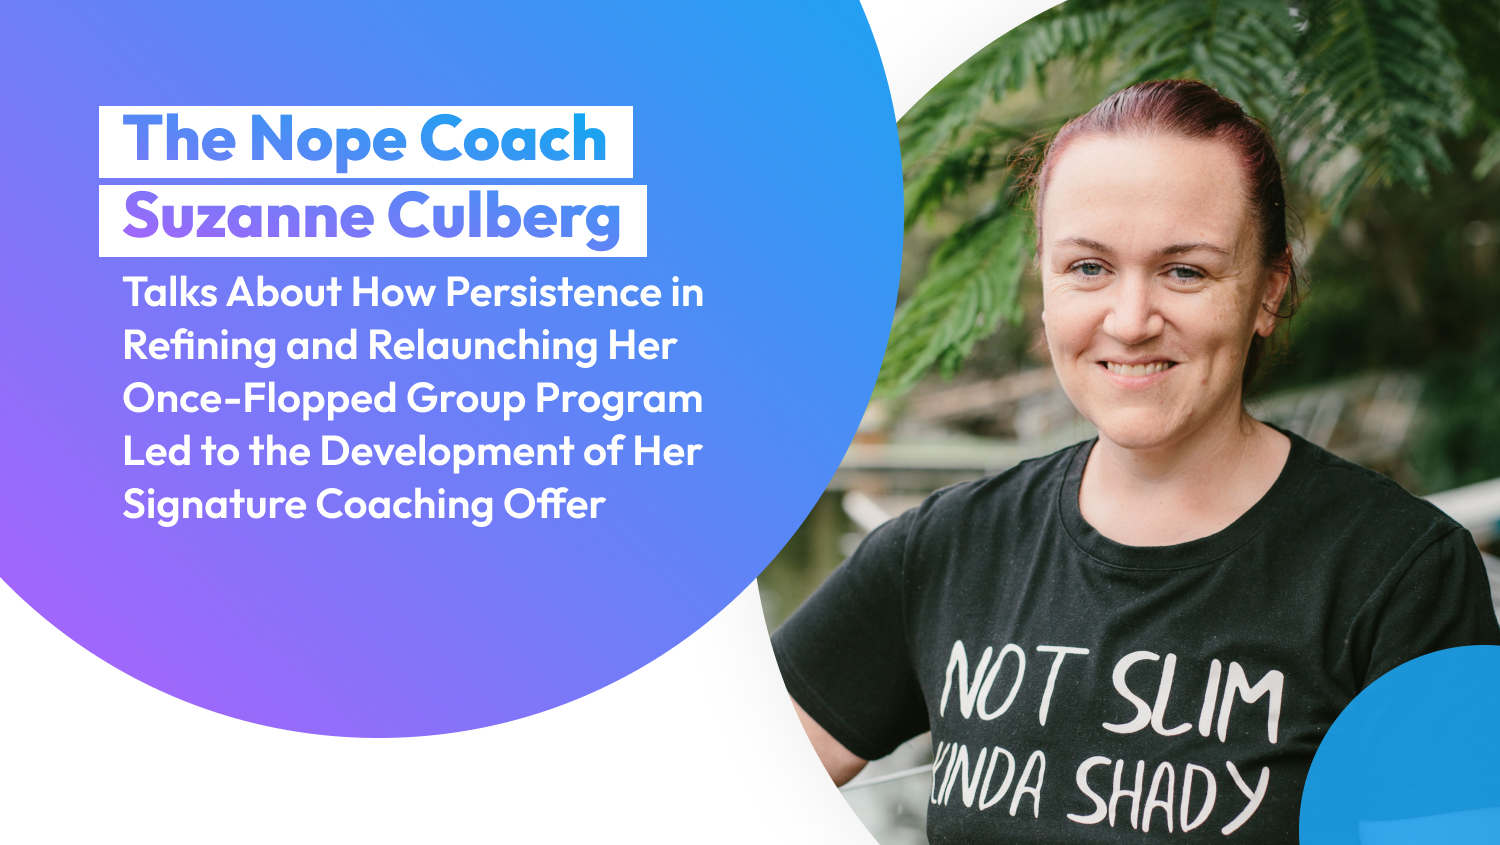 The Nope Coach Suzanne Culberg